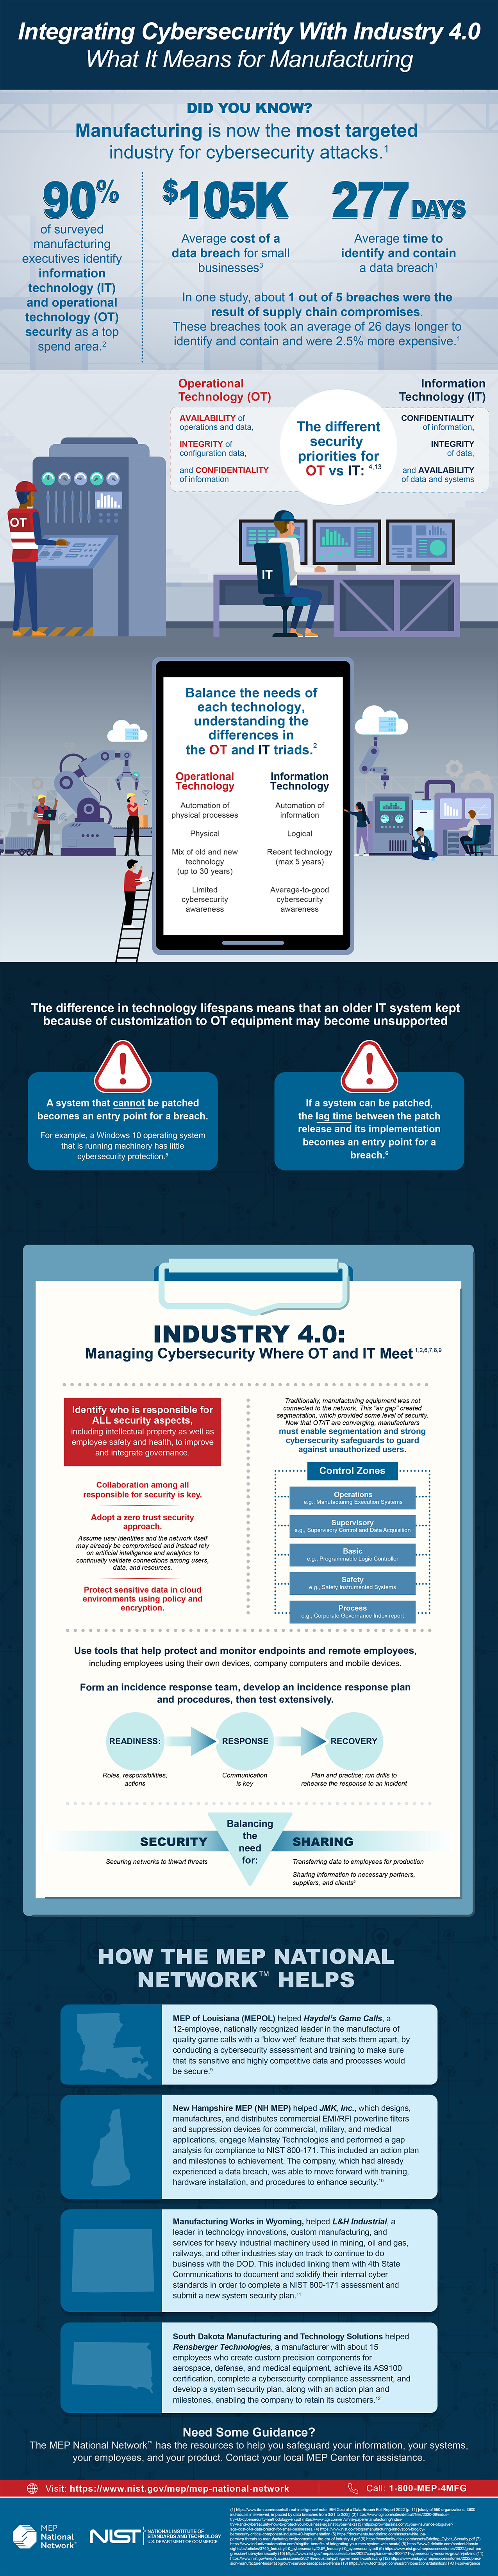 Integrating cybersecurity with Industry 4.0 - What it means to manufacturing infographic